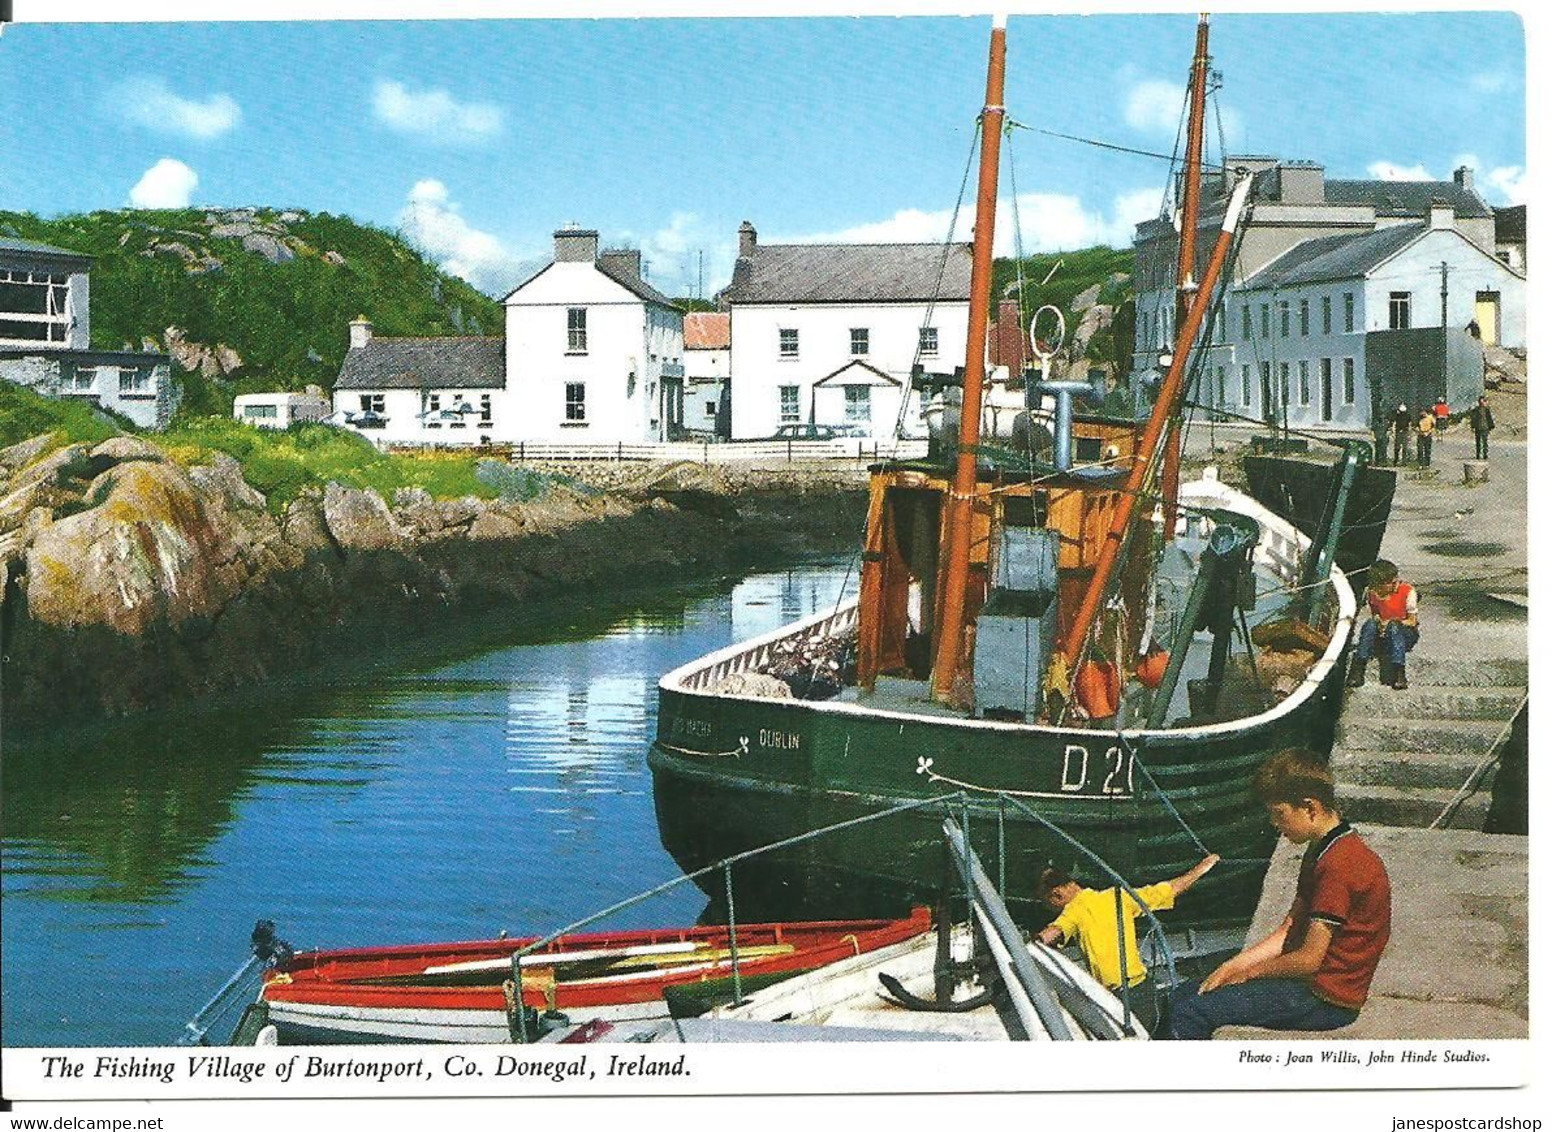 LARGER SIZED POSTCARD - THE FISHING VILLAGE OF BURTONPORT  - CO. DONEGAL - IRELAND - Donegal